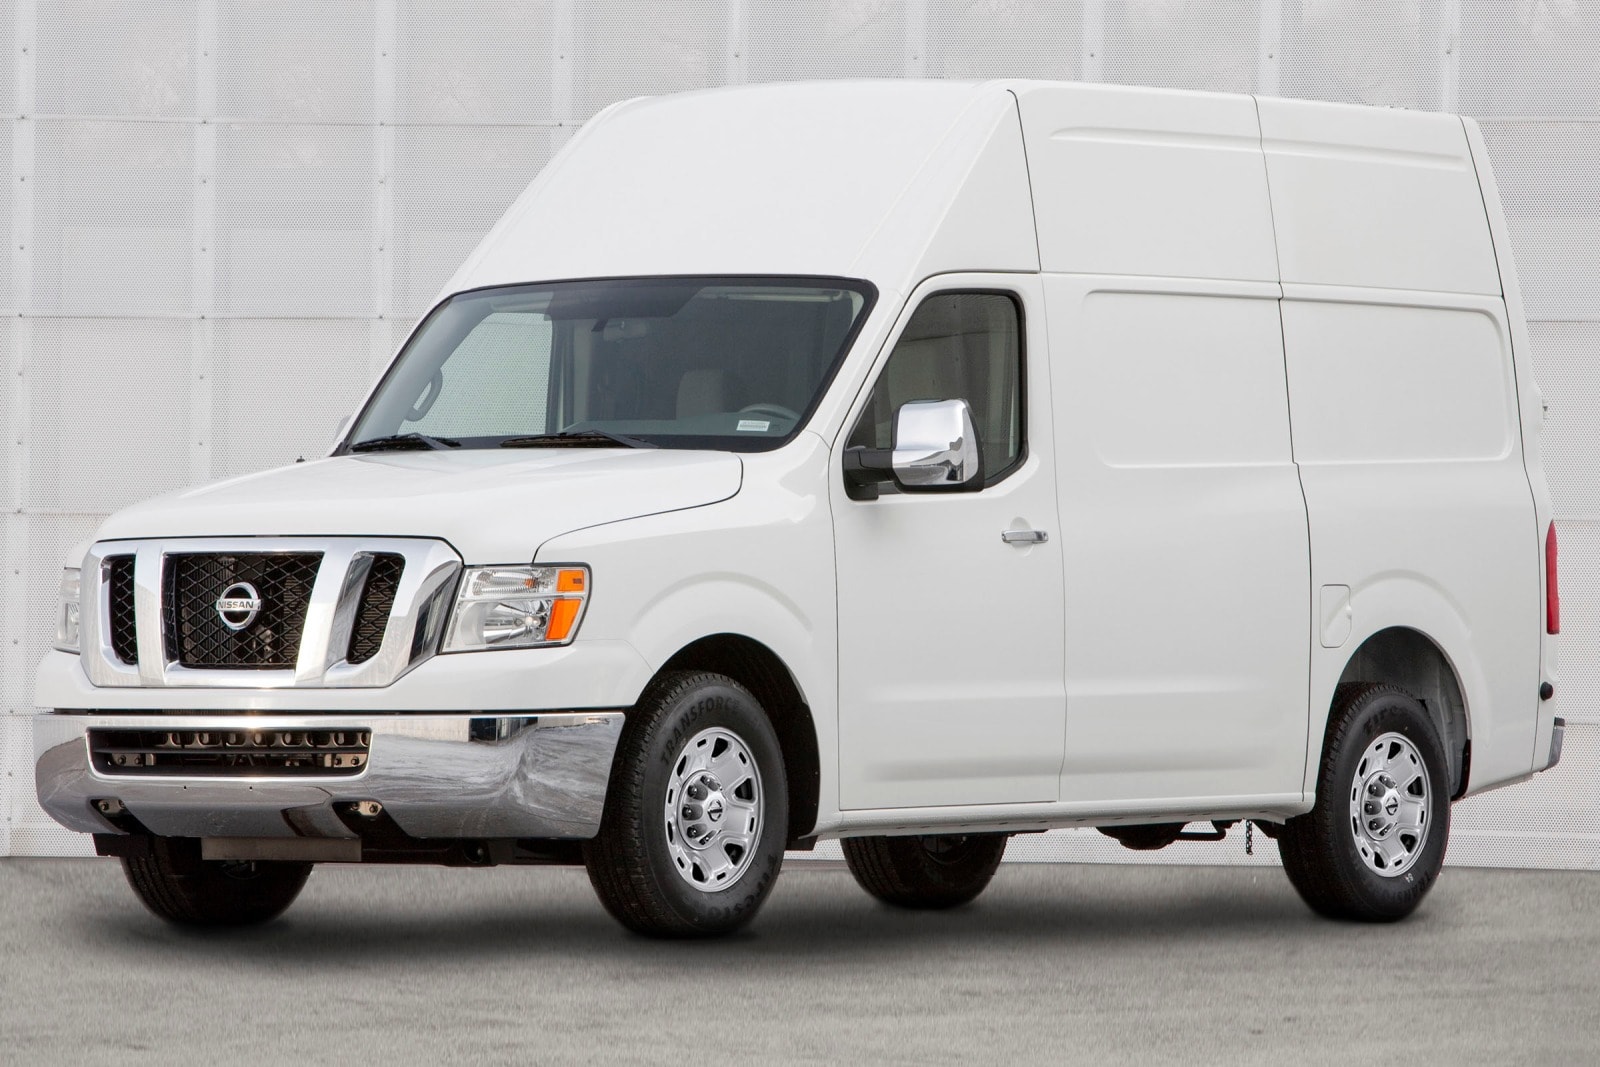 The 2014 Nissan NV3500: Addressing Issues and Concerns